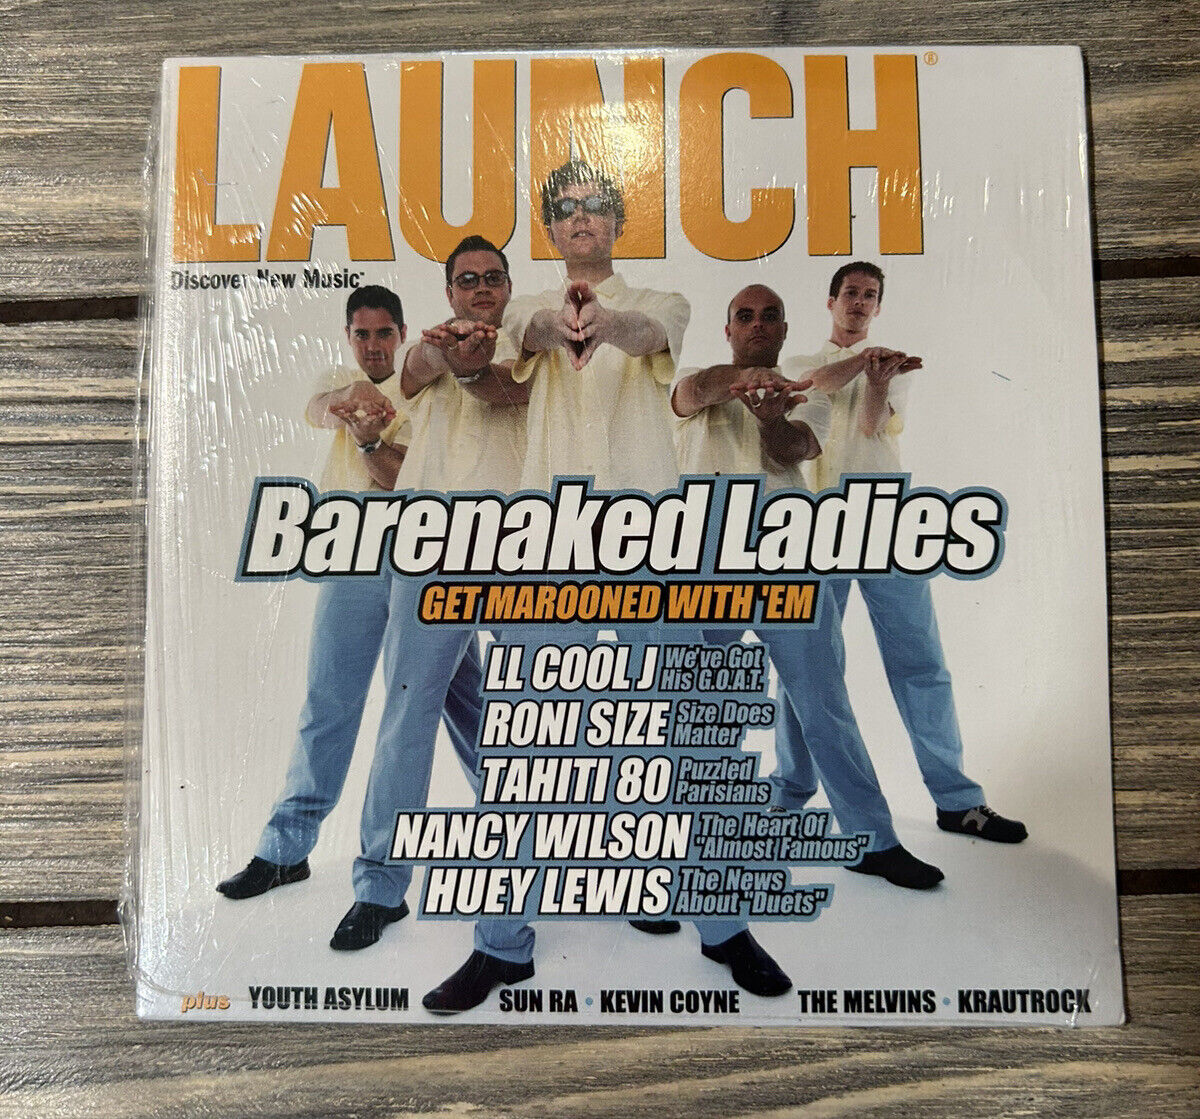 Vintage 2000 Launch CD Barenaked Ladies Get Marooned with Em PC Disc